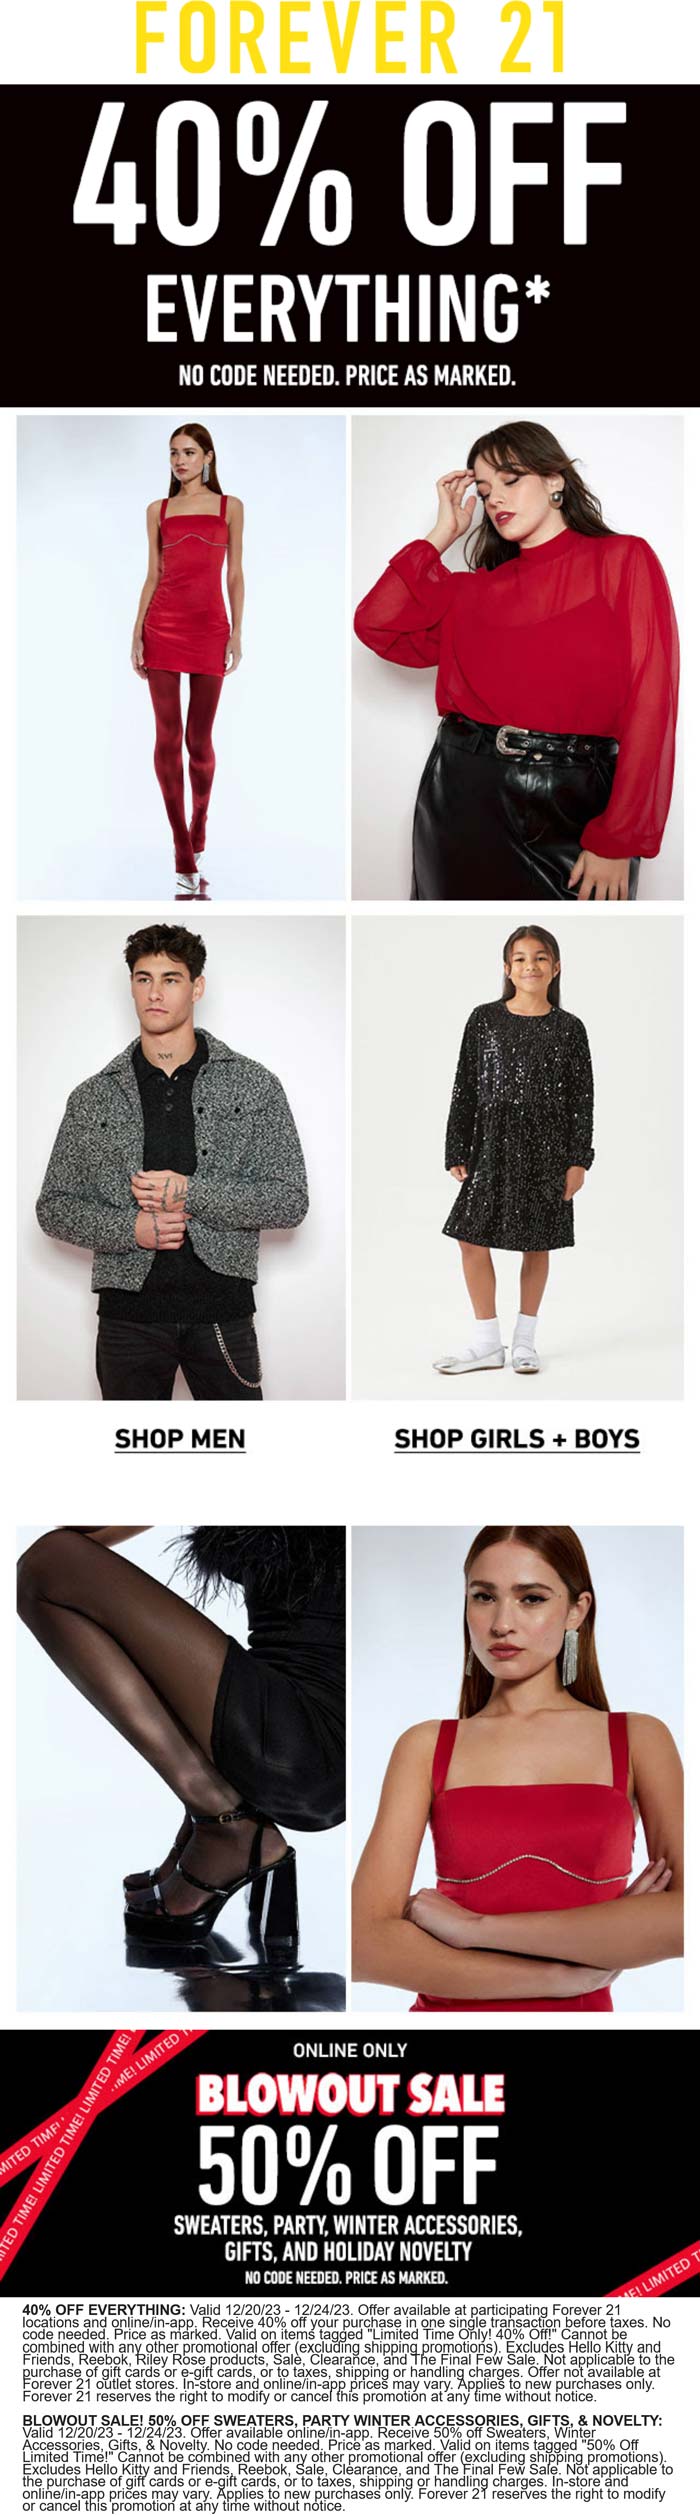 40-50% off everything at Forever 21 #forever21